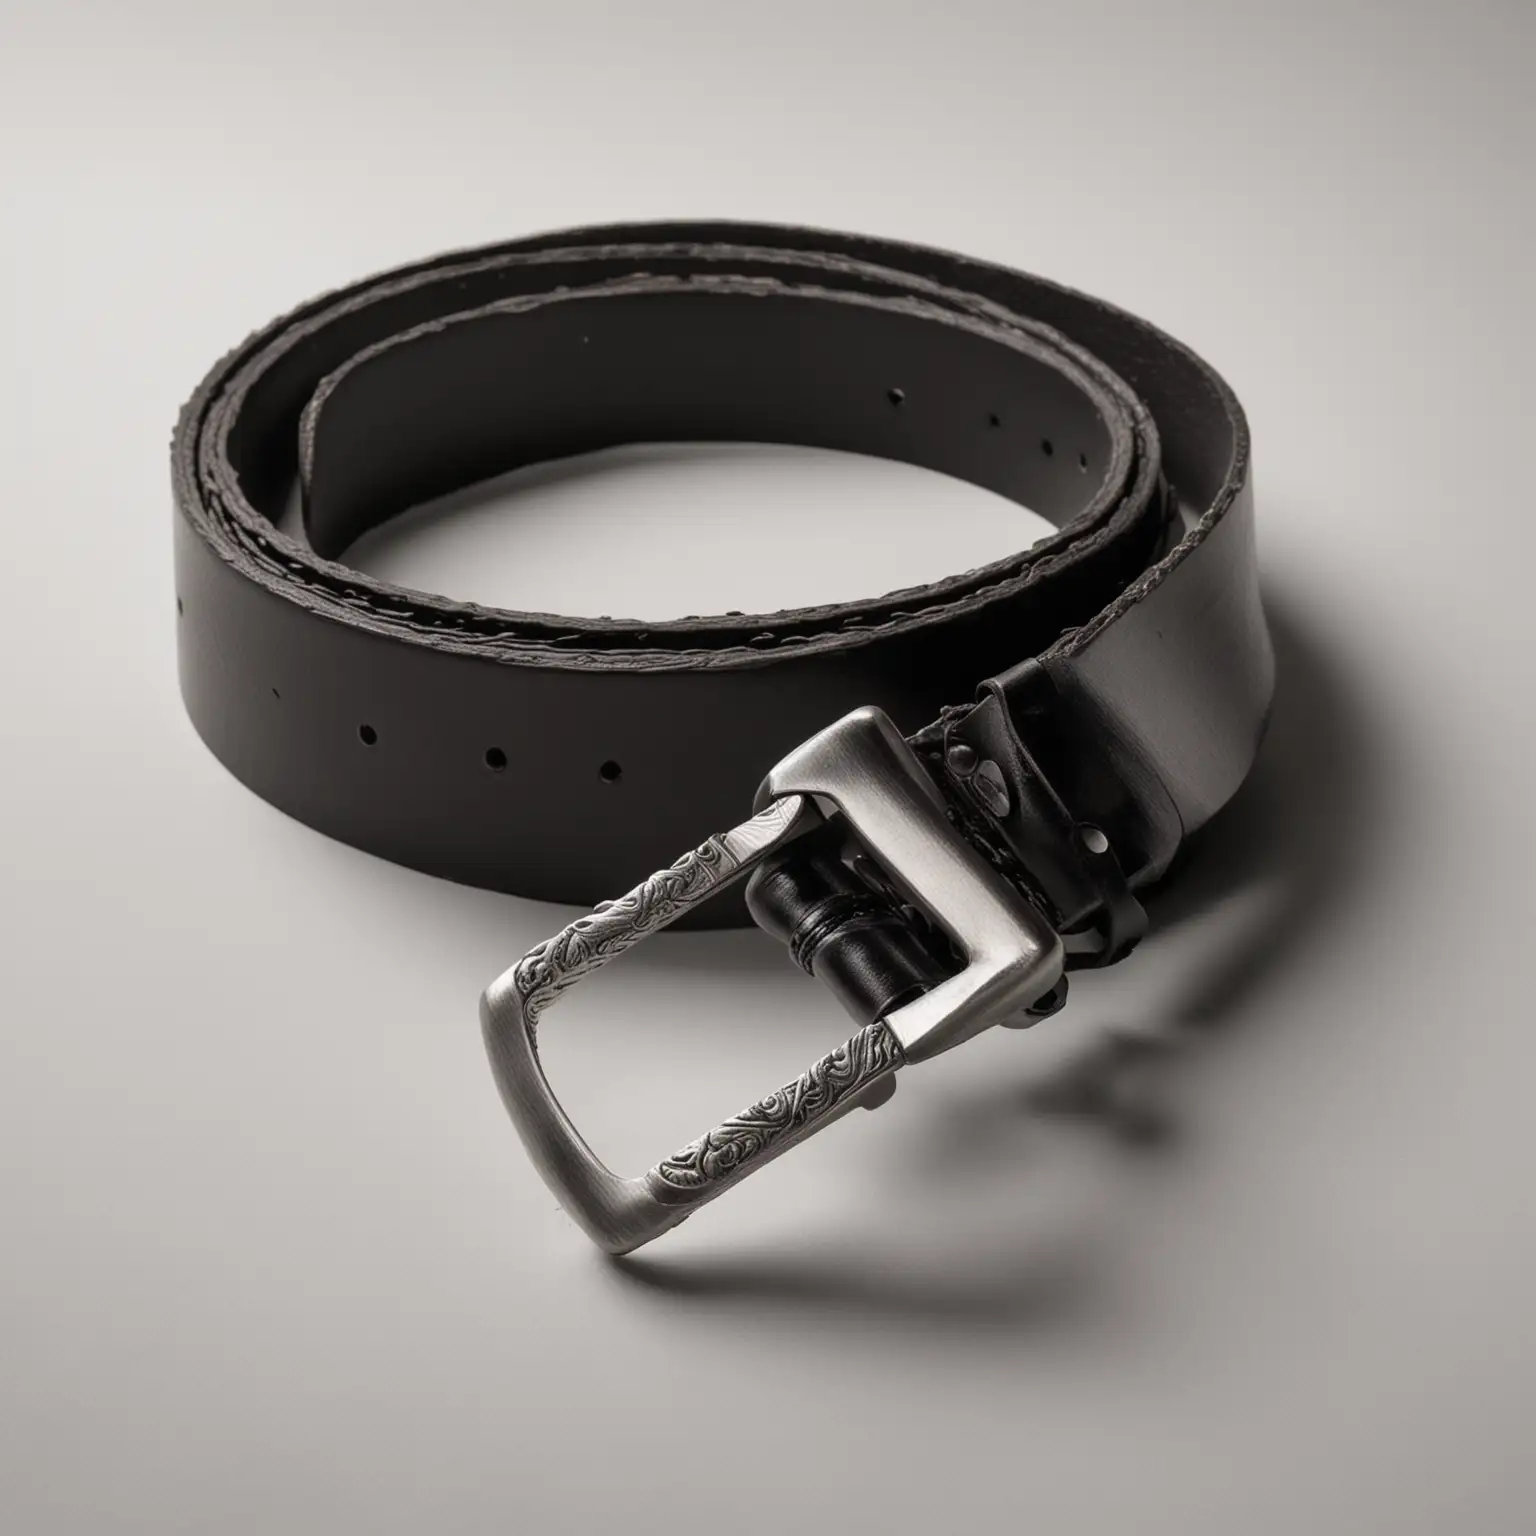 a man's black leather belt lying on a white background
